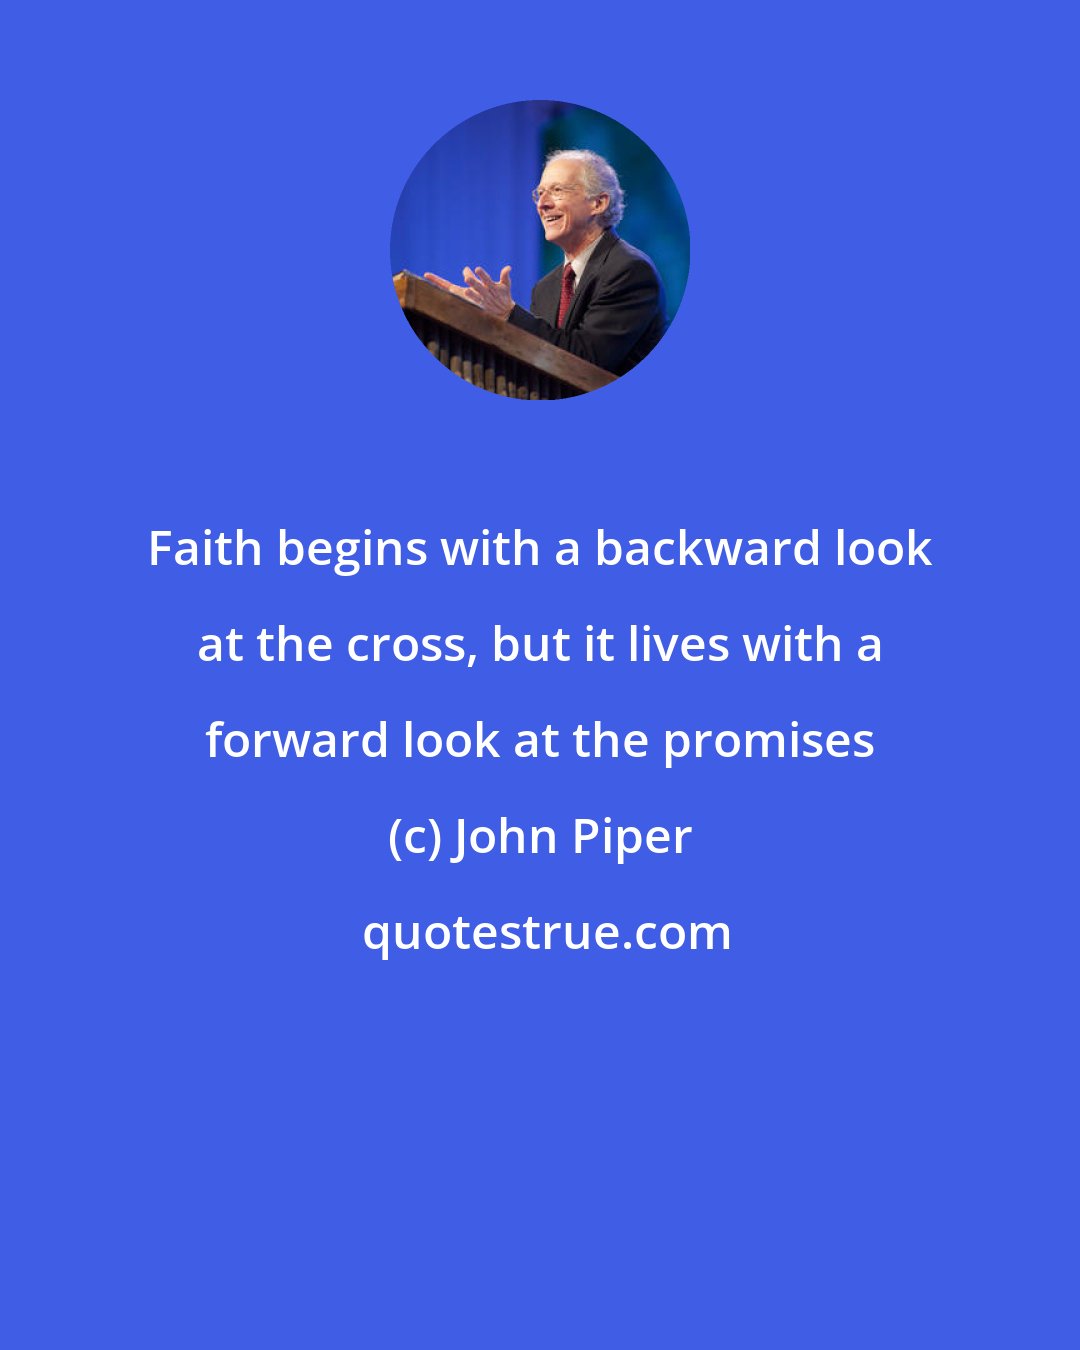 John Piper: Faith begins with a backward look at the cross, but it lives with a forward look at the promises